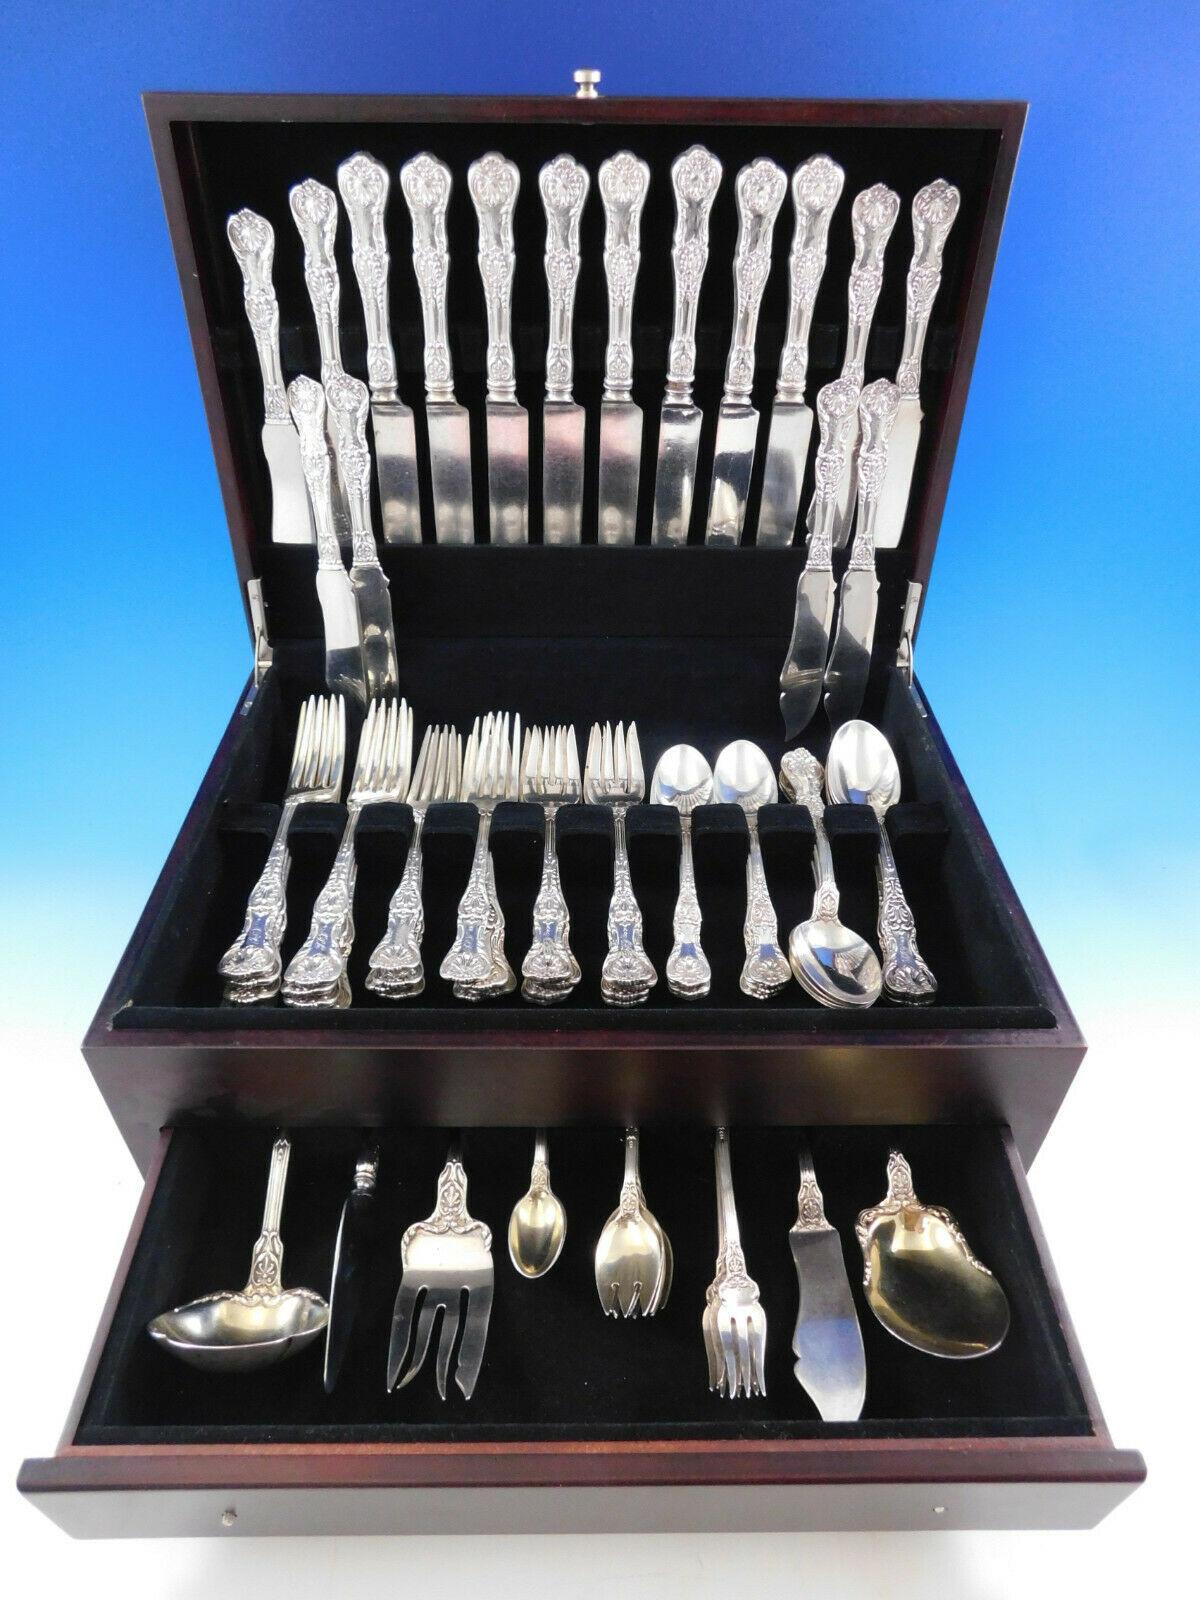 Dinner size King George by Gorham sterling silver flatware set - 85 pieces. This set includes:

8 dinner size knives, 9 5/8